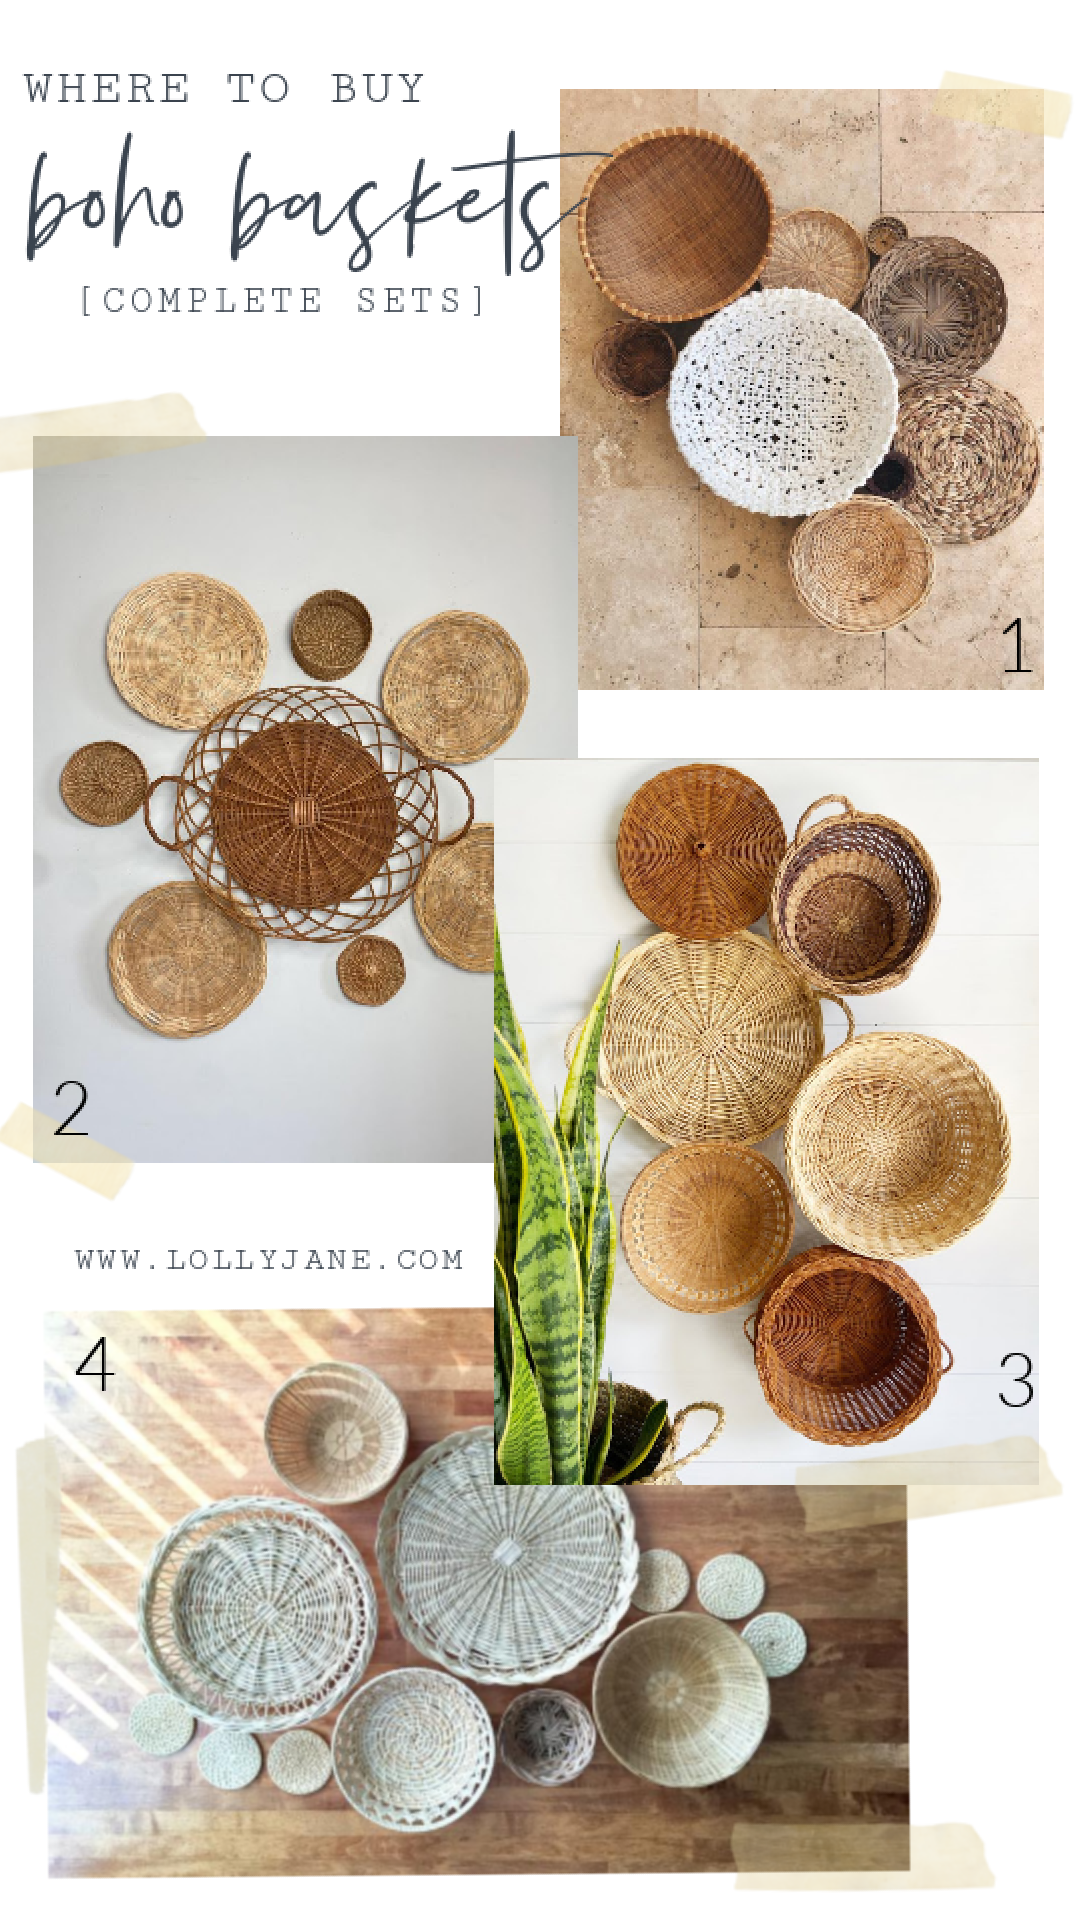 Where to buy boho basket sets for easy wall treatments: Etsy shops! Copy the trendy boho chic wall treatment by adding rattan placemats and wicker plate holders on the wall for pretty basket wall art! #rattanbaskets #bohobaskets #wickerbasketart #wickerwallbaskets #bohodecor #bohobasketcollections #etsyshopfinds